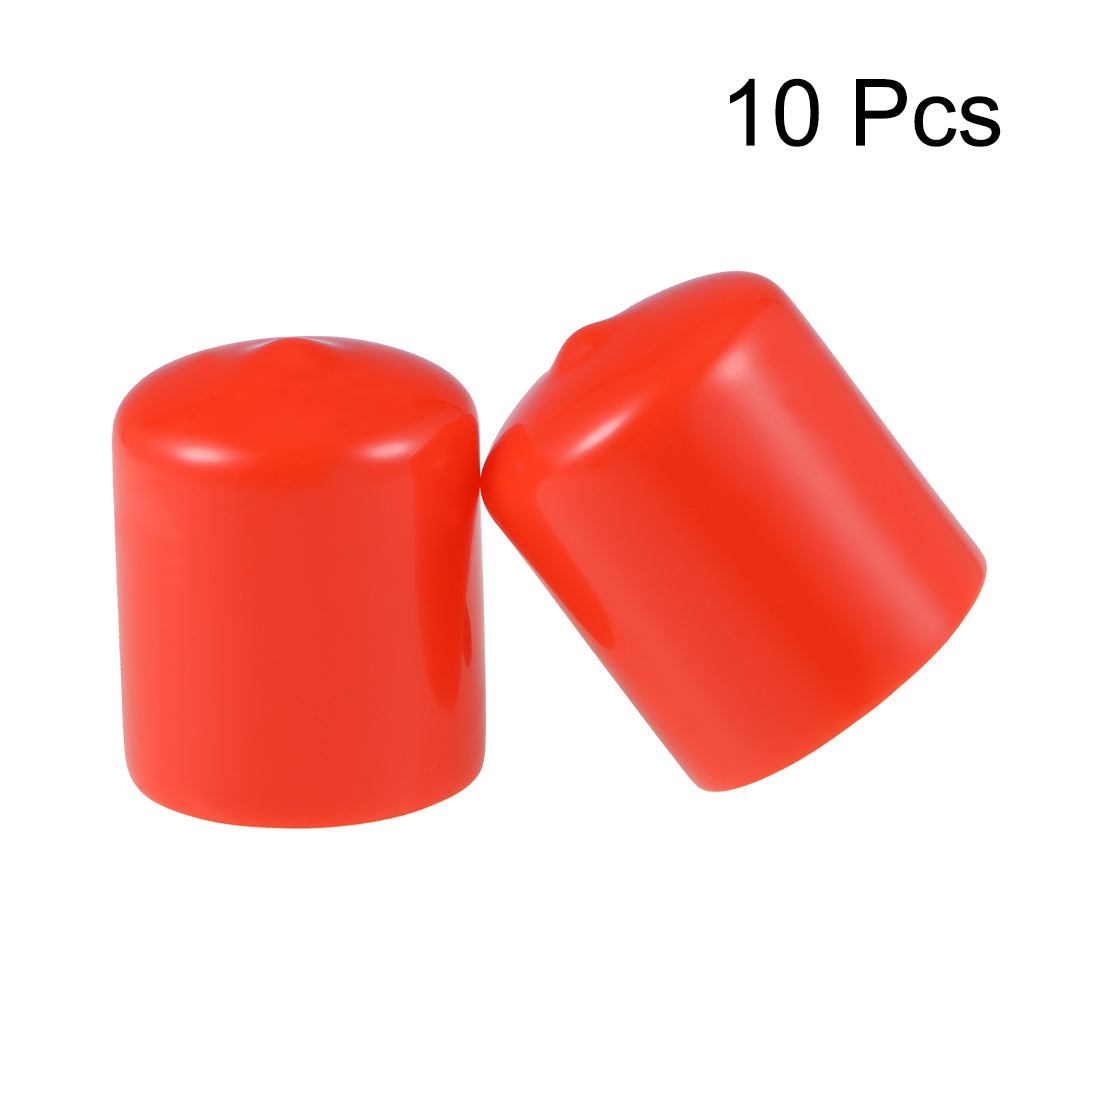 uxcell Uxcell Screw Thread Protector, 27mm ID Round End Cap Cover Red Tube Caps 10pcs